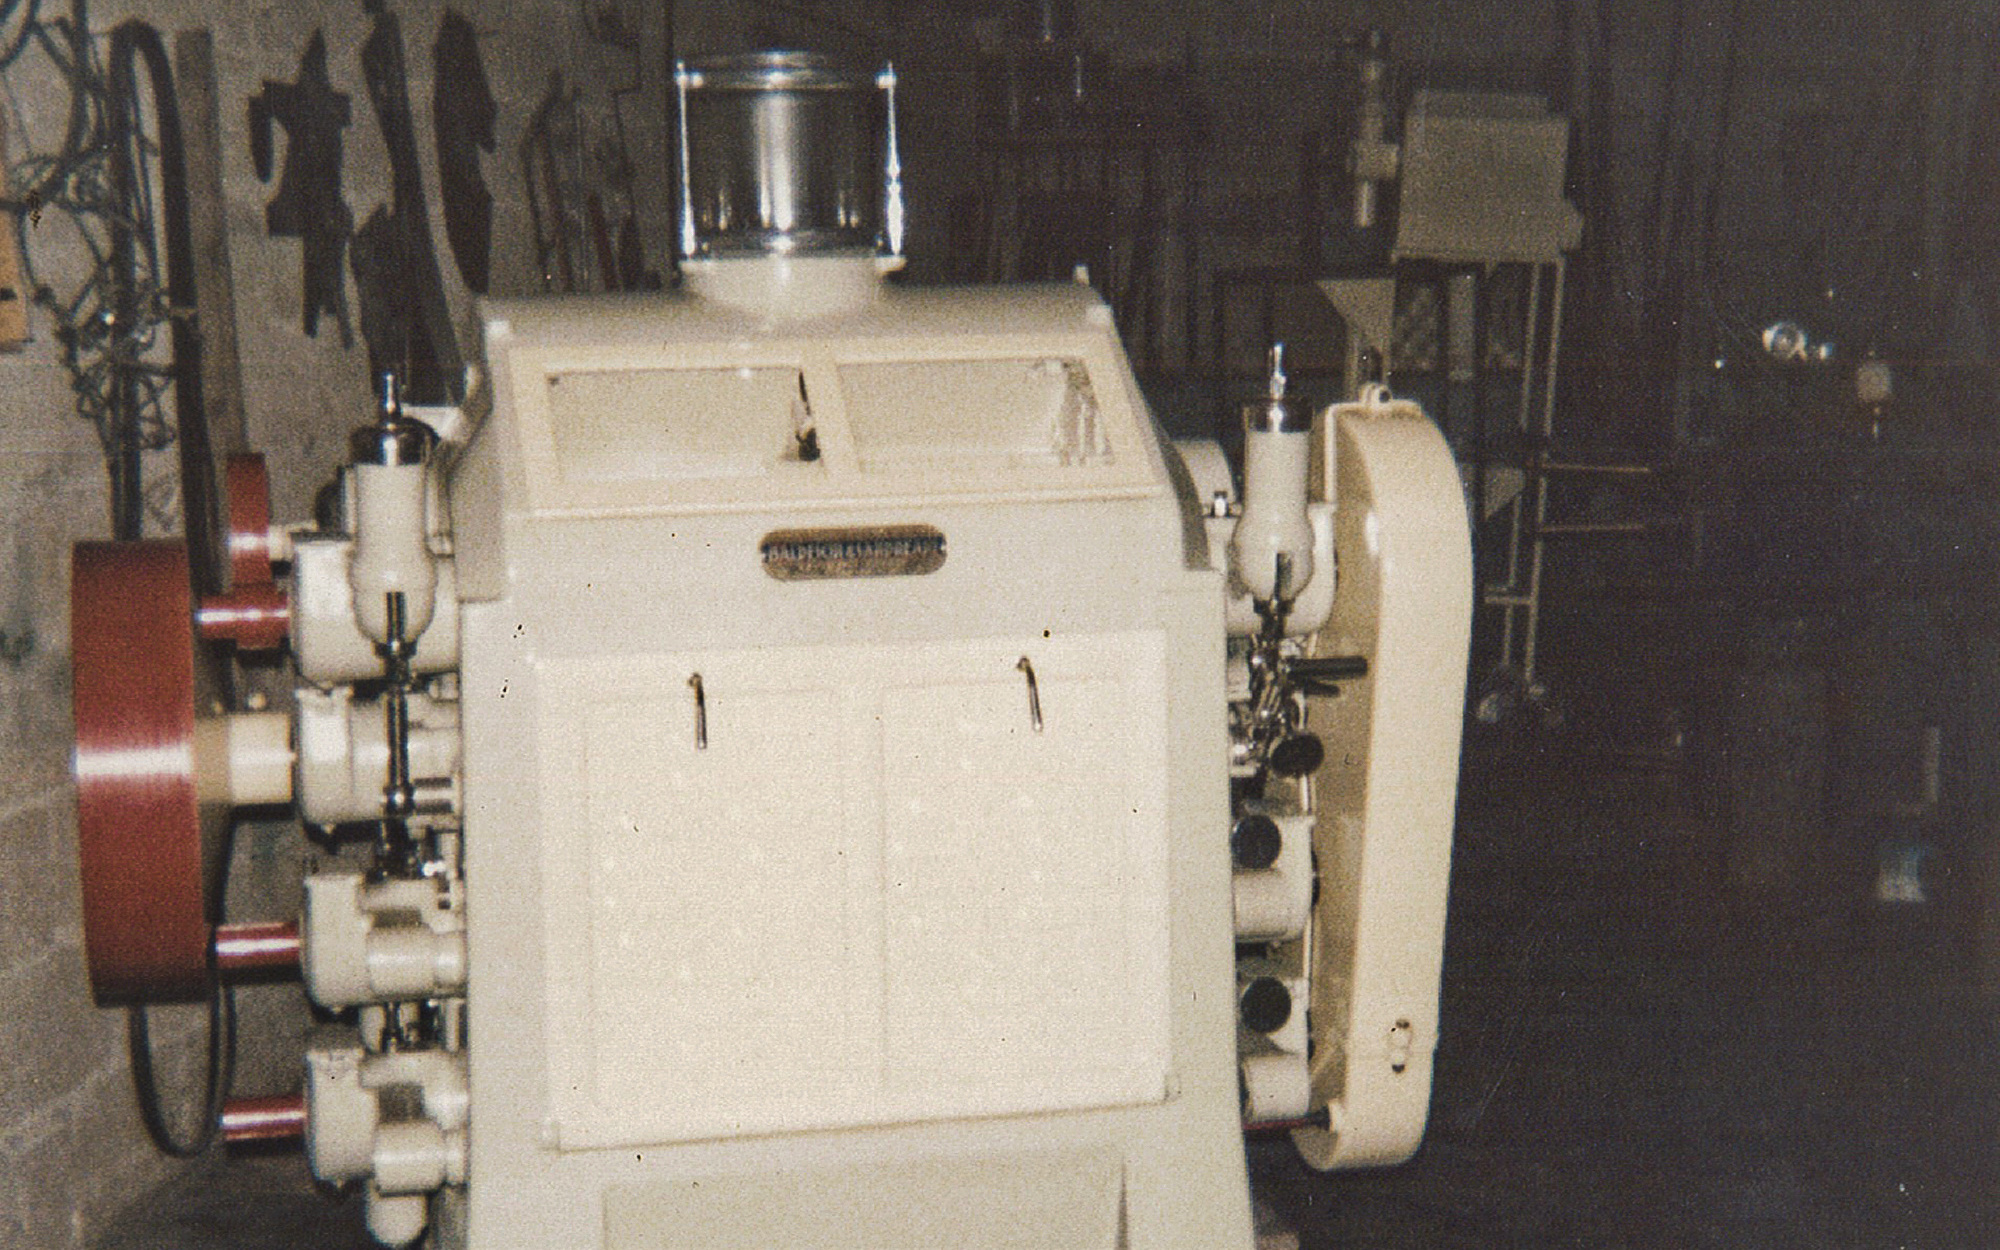 REVISION OF MILL’S MACHINES